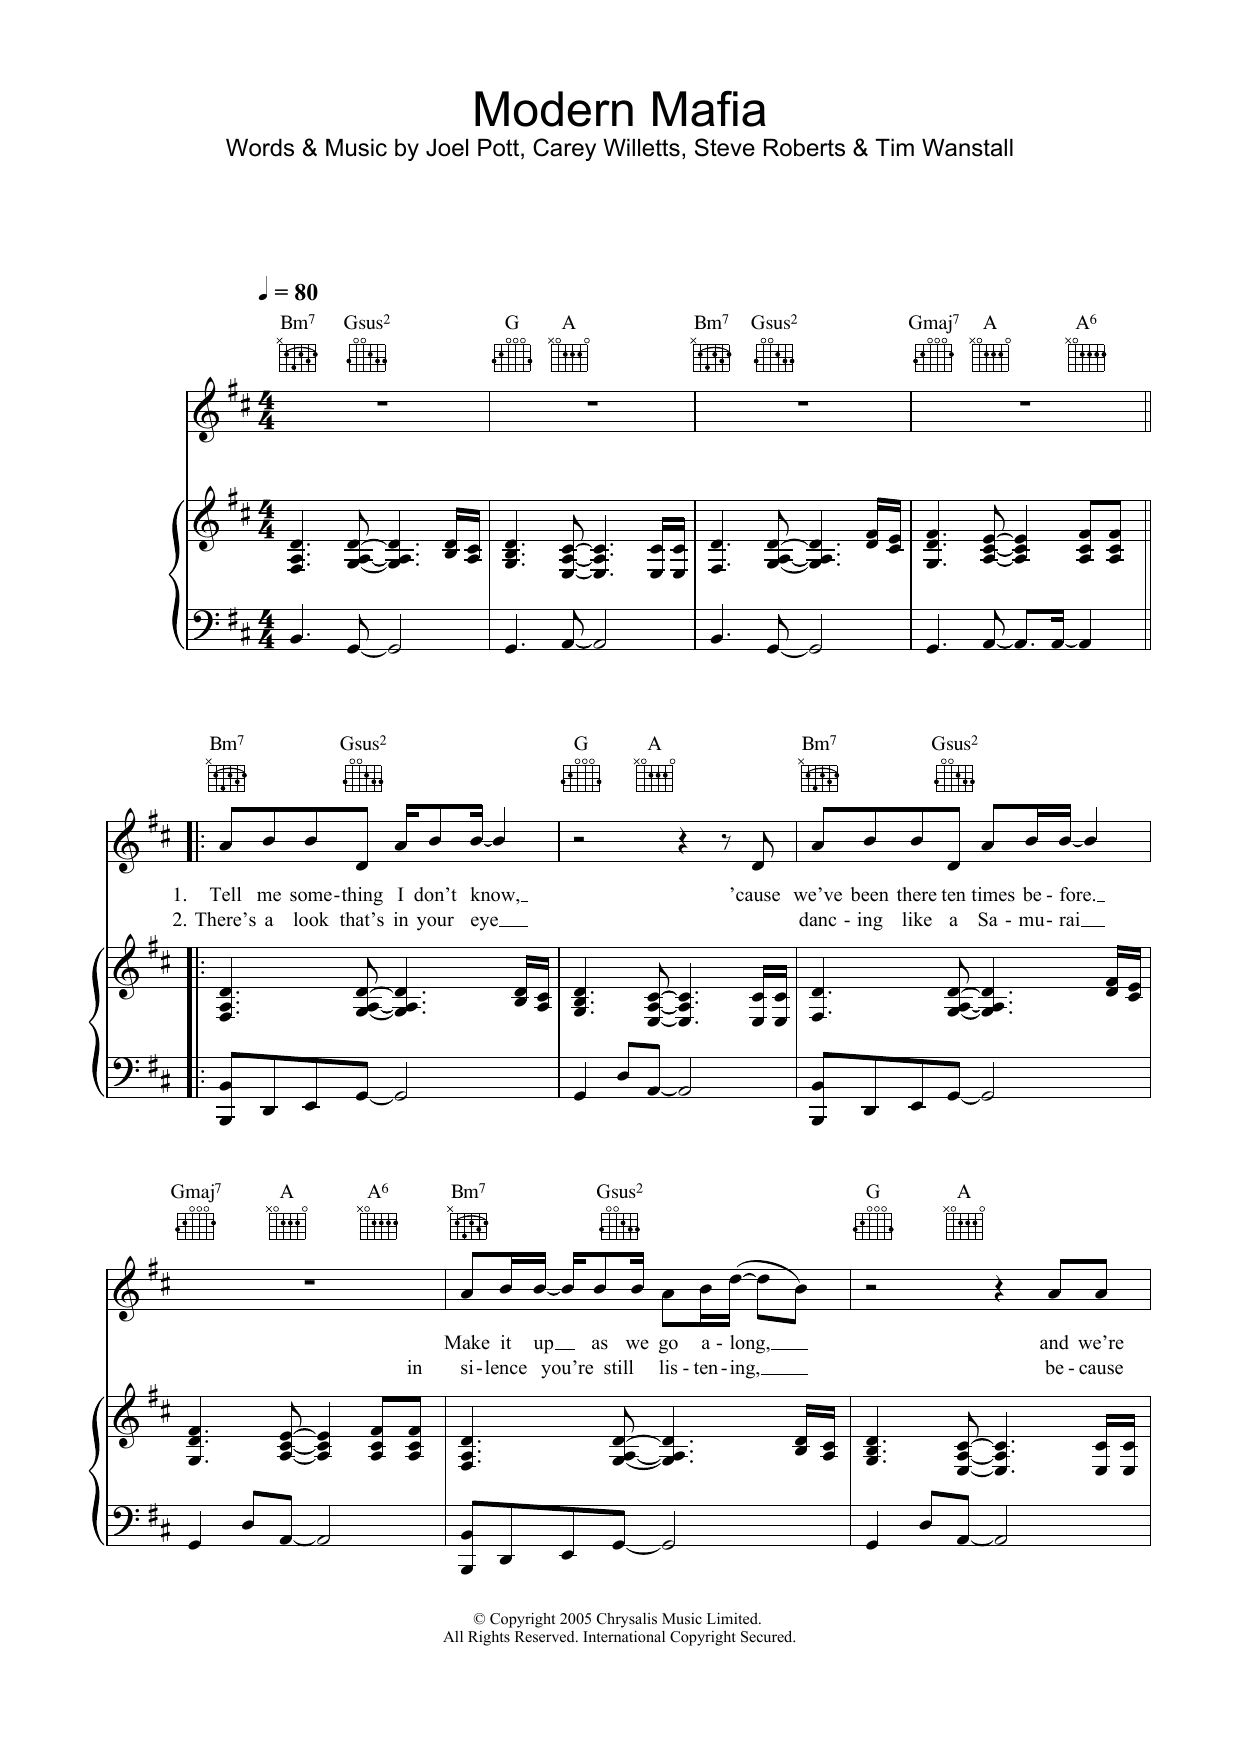 Athlete Modern Mafia sheet music preview music notes and score for Piano, Vocal & Guitar including 3 page(s)